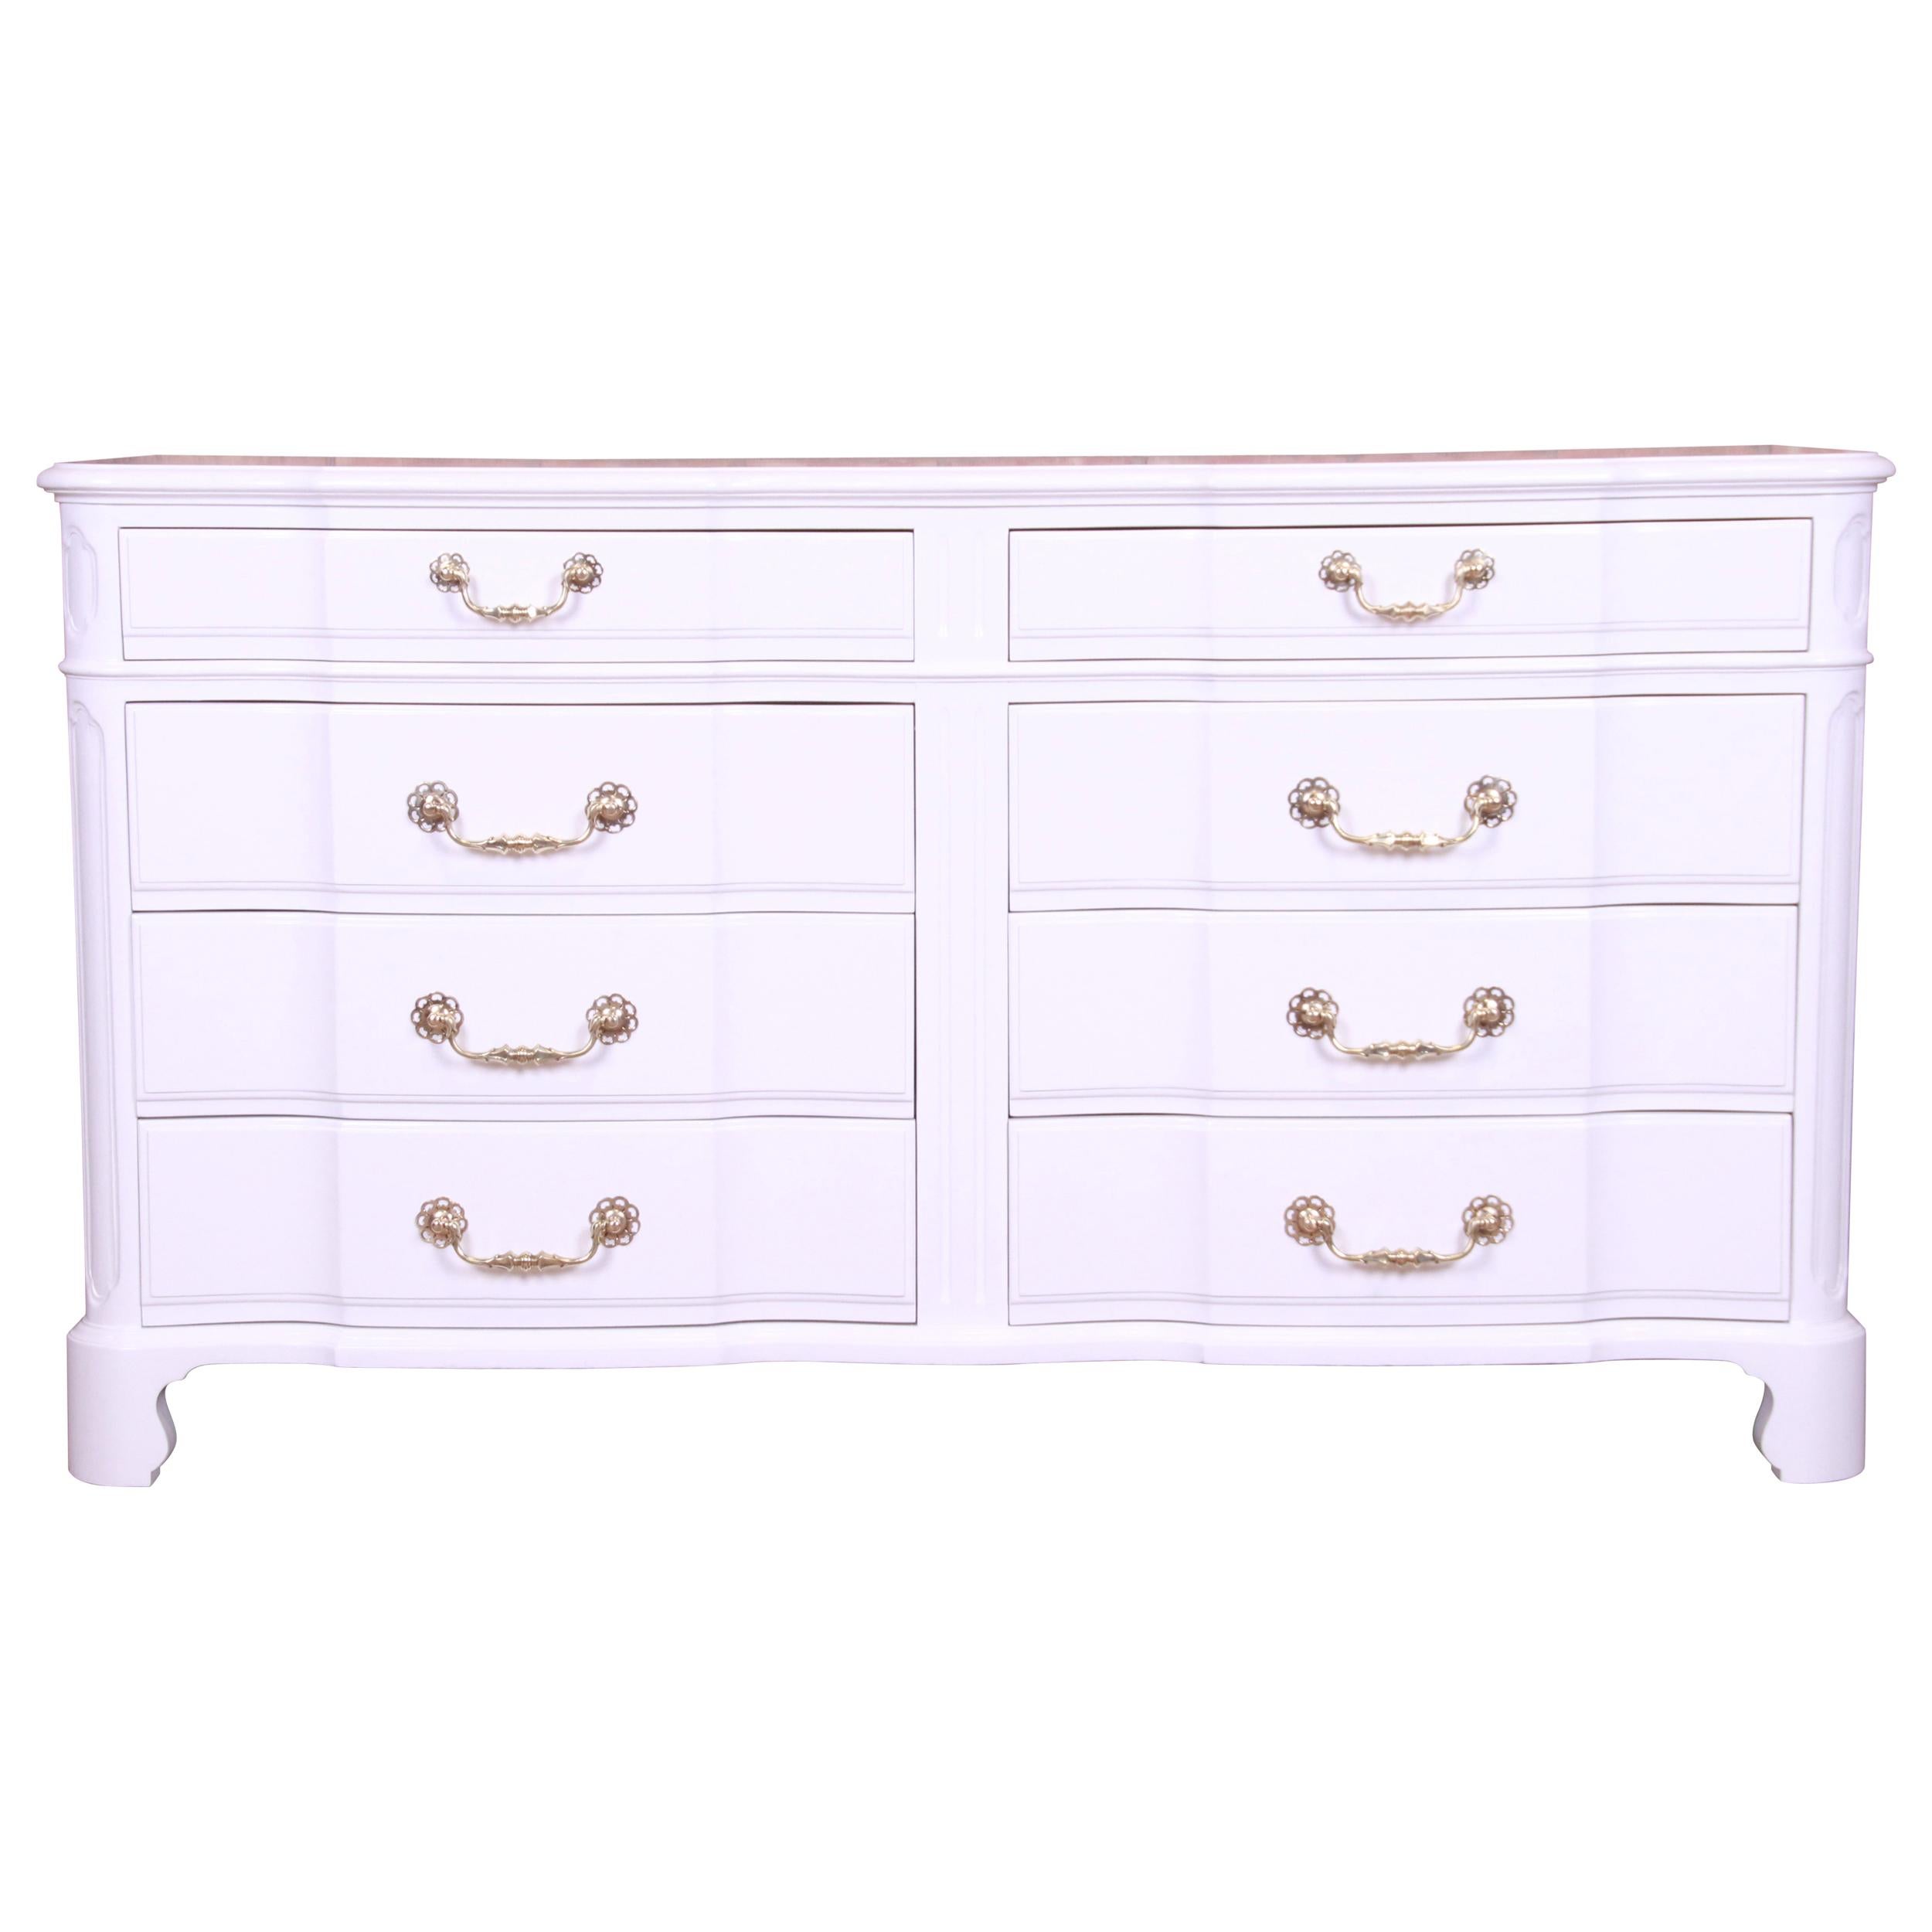 John Widdicomb French Provincial White Lacquered Dresser, Newly Refinished